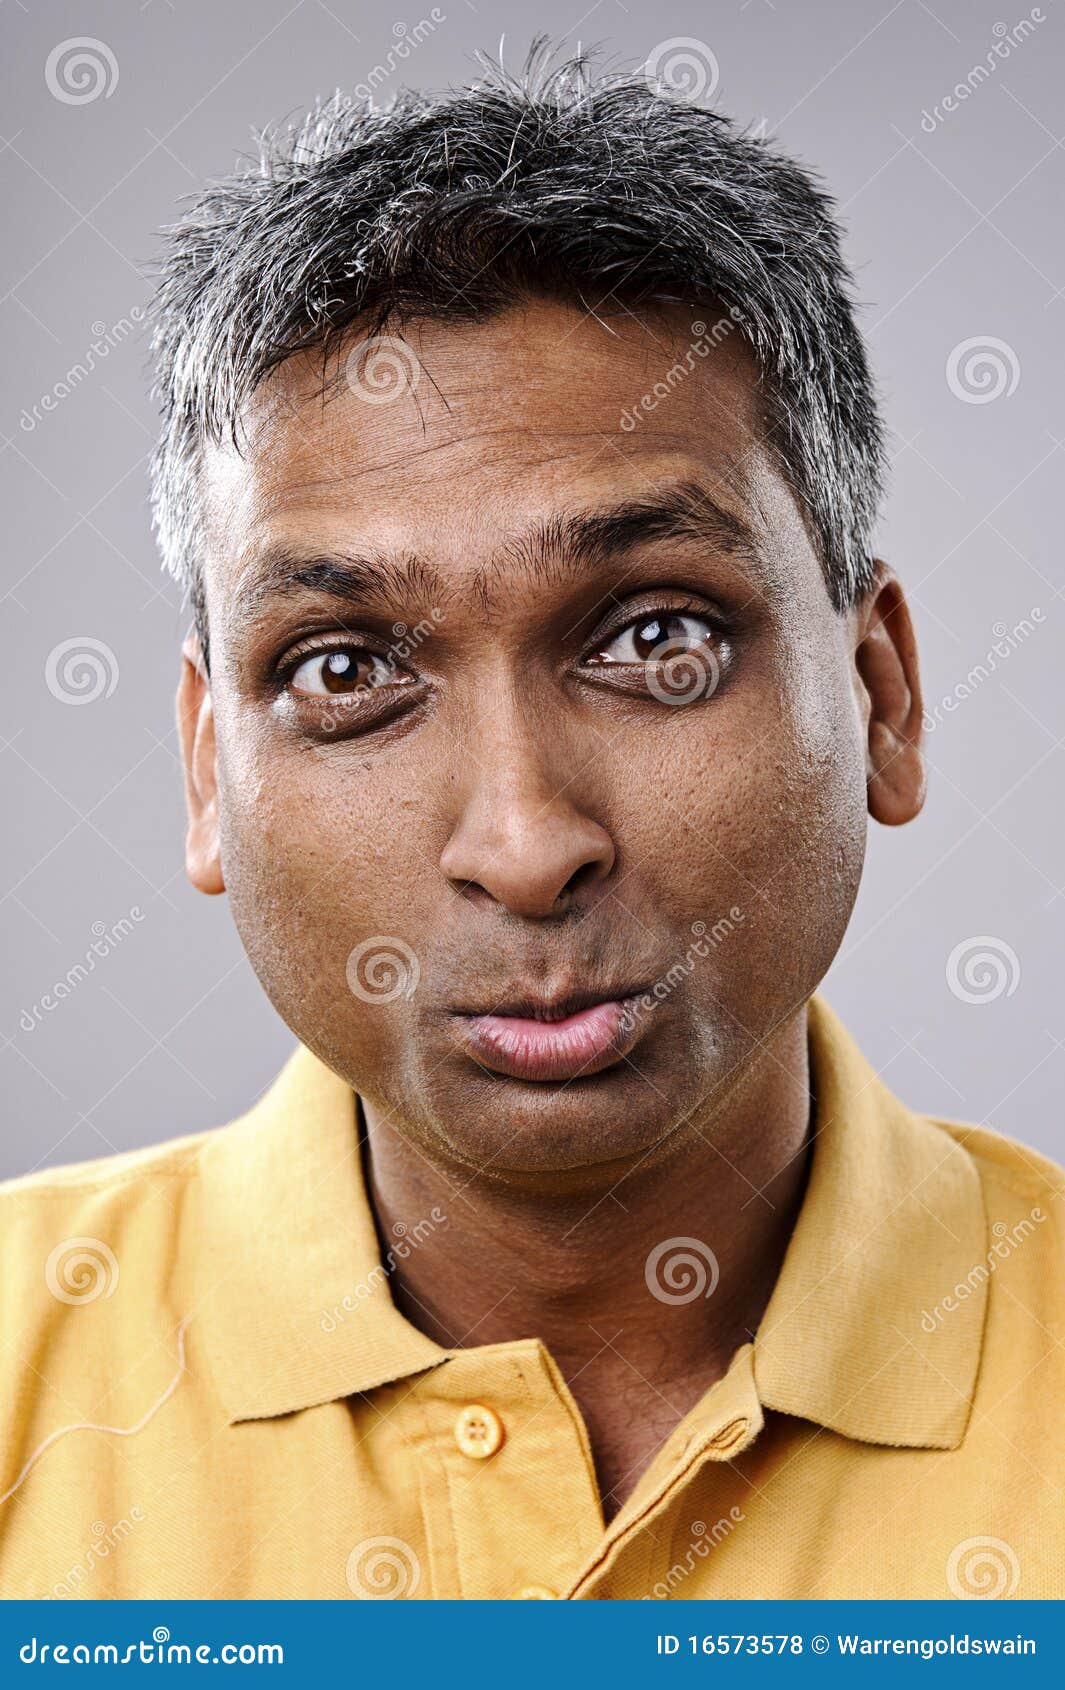 Silly funny face stock photo. Image of pout, male, head - 16573578